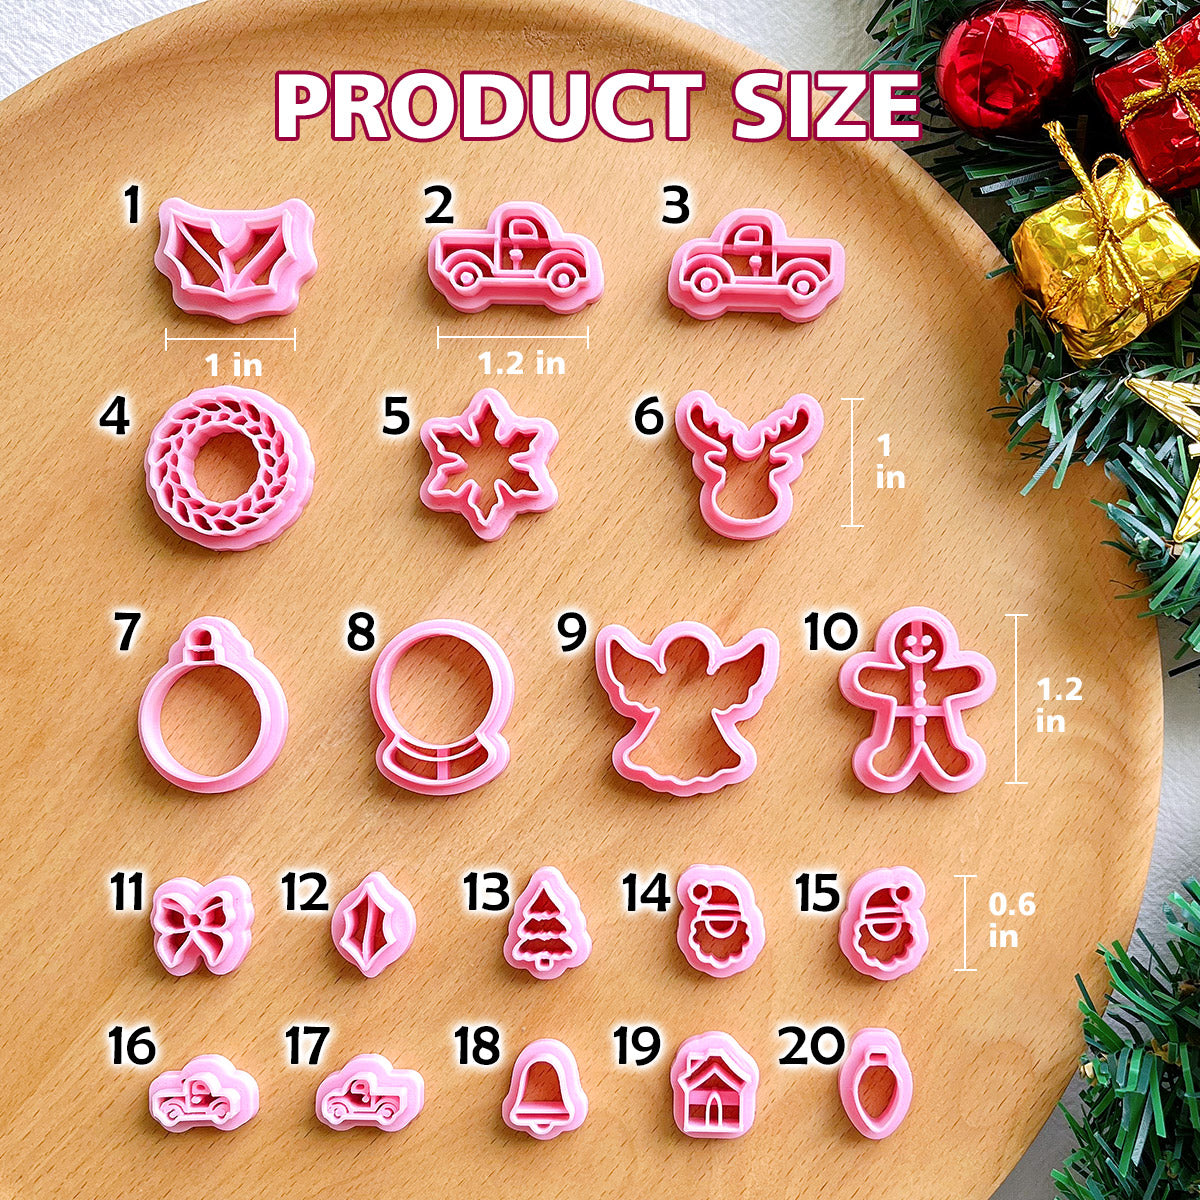 KEOKER Christmas Clay Cutters, Winter Polymer Clay Cutters for Earrings  Making, 10 Shapes Holiday Clay Earrings Cutters -  Denmark